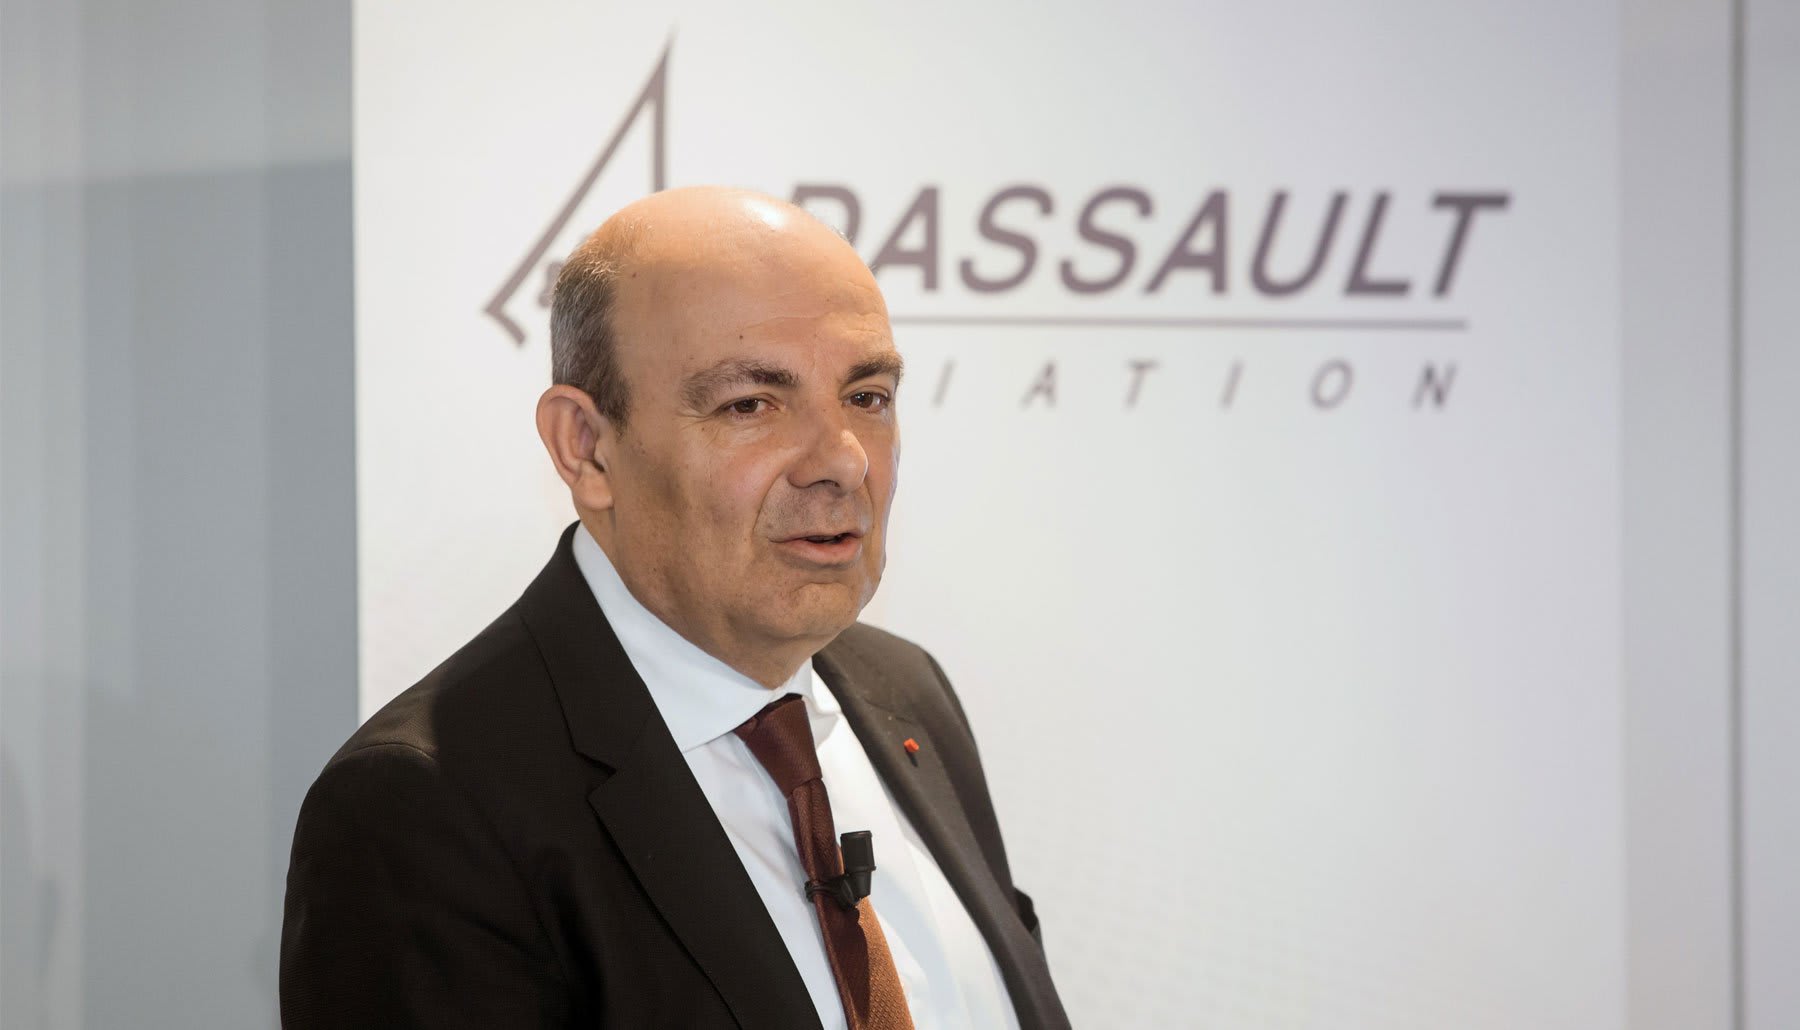 Mr Eric Trappier, Chairman & CEO of Dassault Aviation, named new Chairman of GIFAS - Corporate News